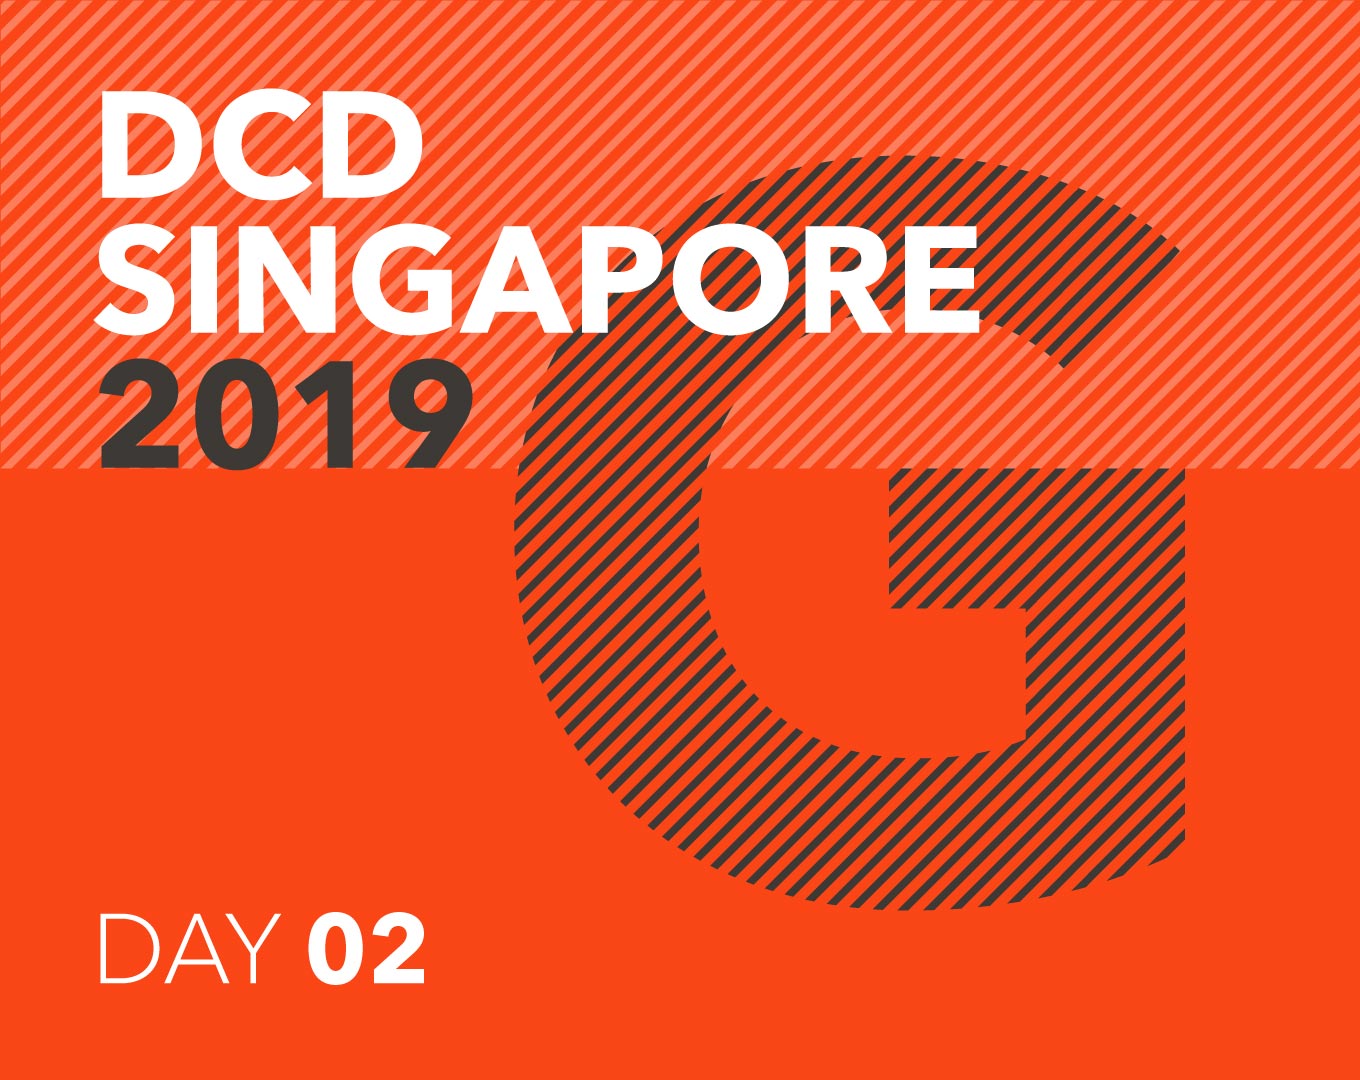 DCD Singapore 2019 day two